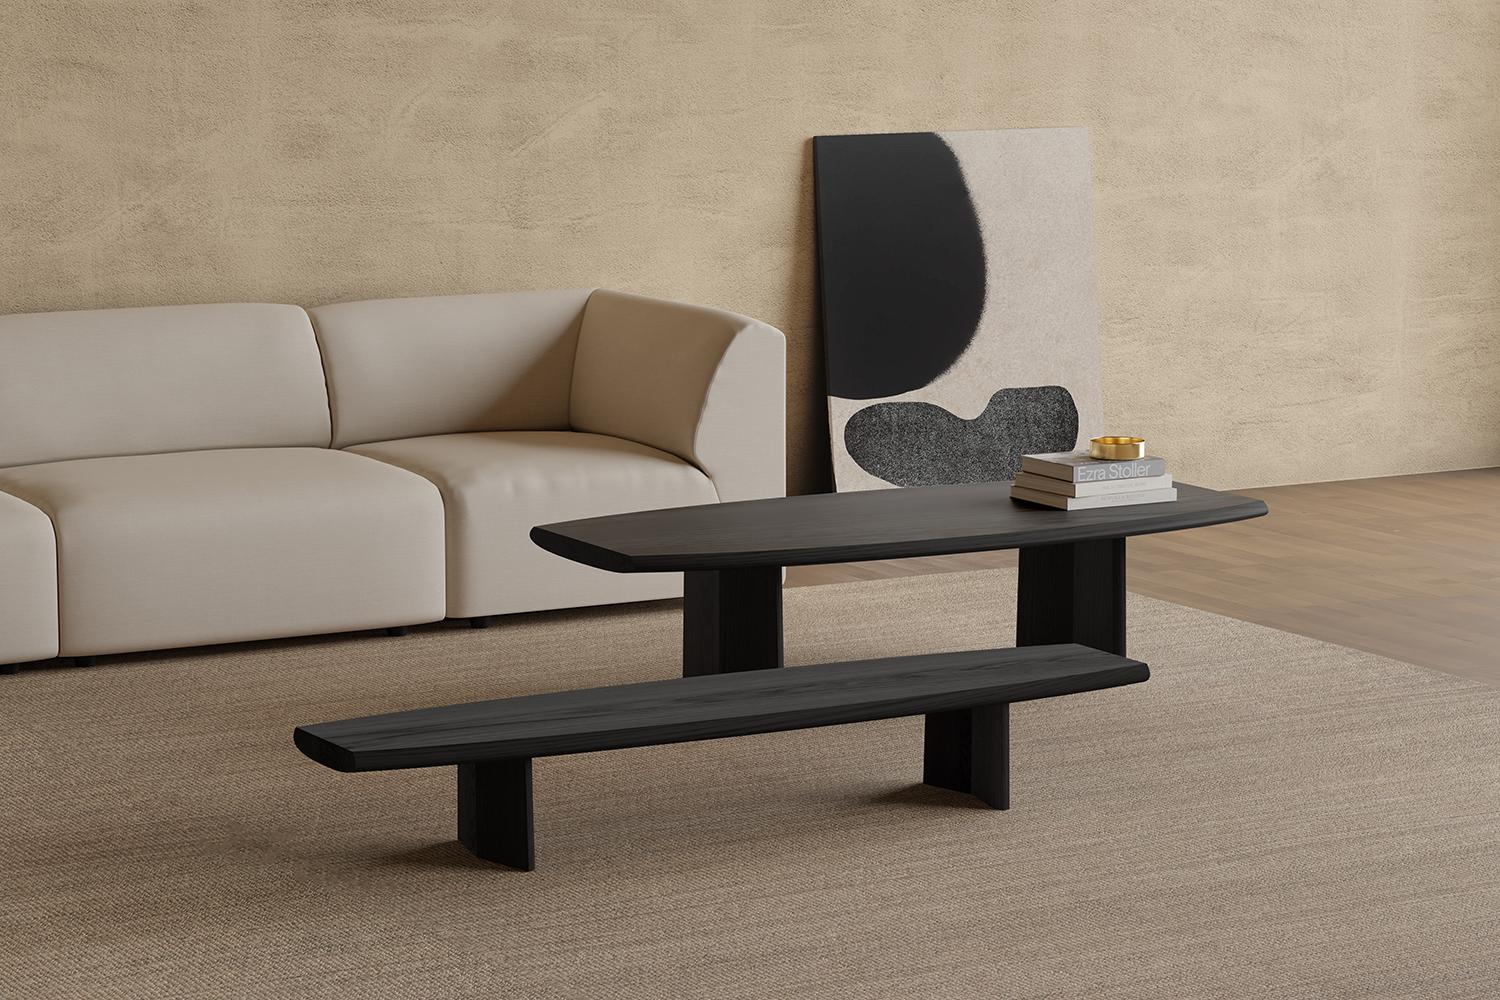 Set of 2 Peana Coffee Tables, Bench in Black Tinted Wood Finish by Joel Escalona

Peana, which in English translates to base or pedestal, is a series of tables and different surfaces inspired by the idea of creating worthy furniture pieces to place